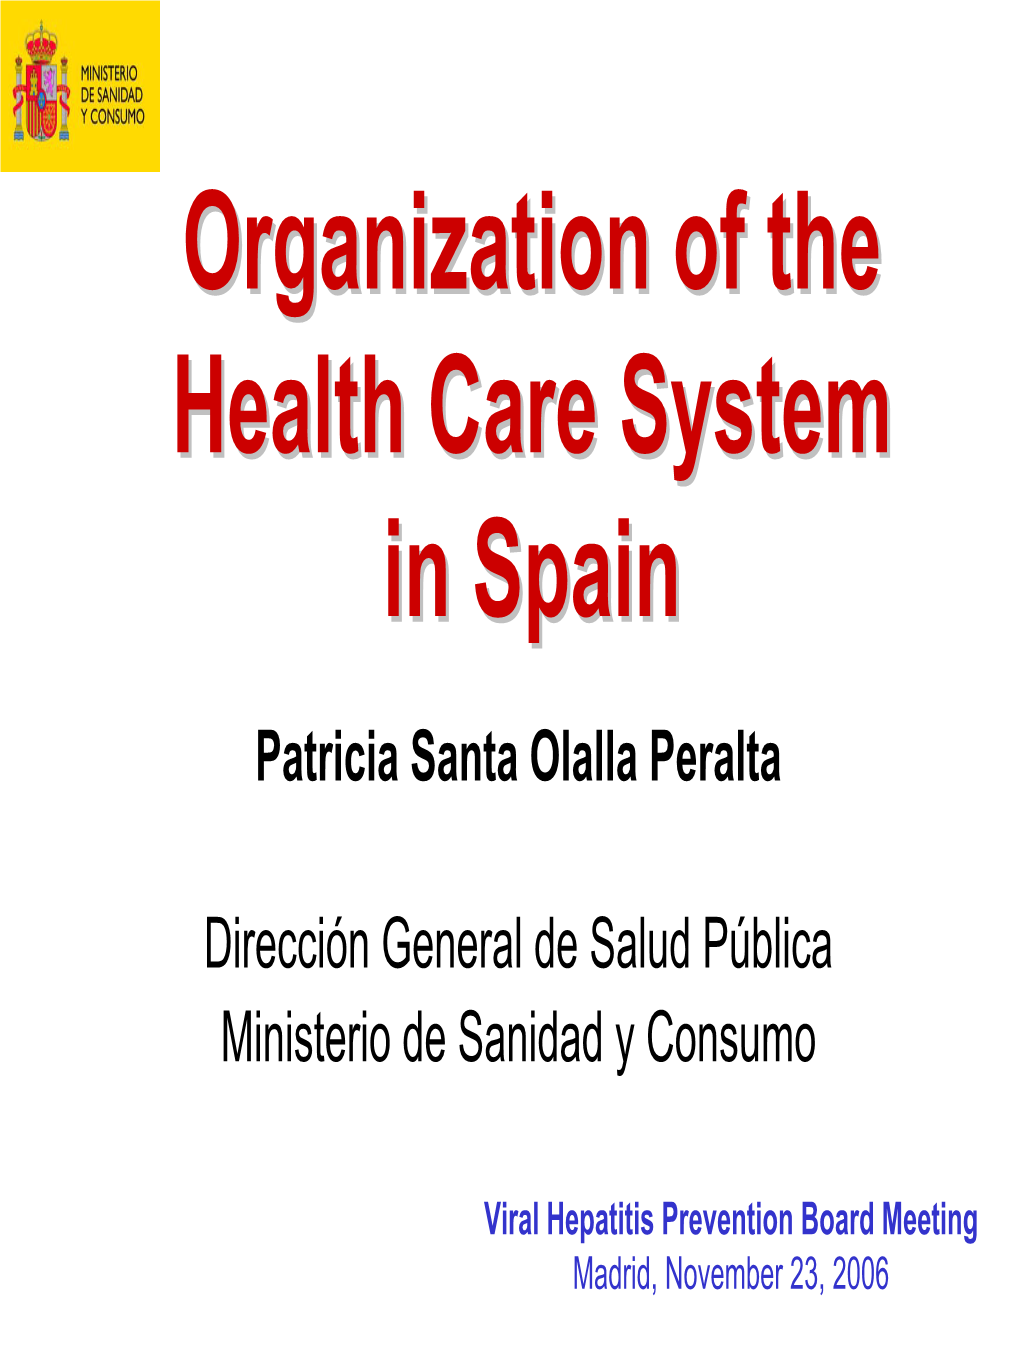 Organisation of the Health Care System in Spain